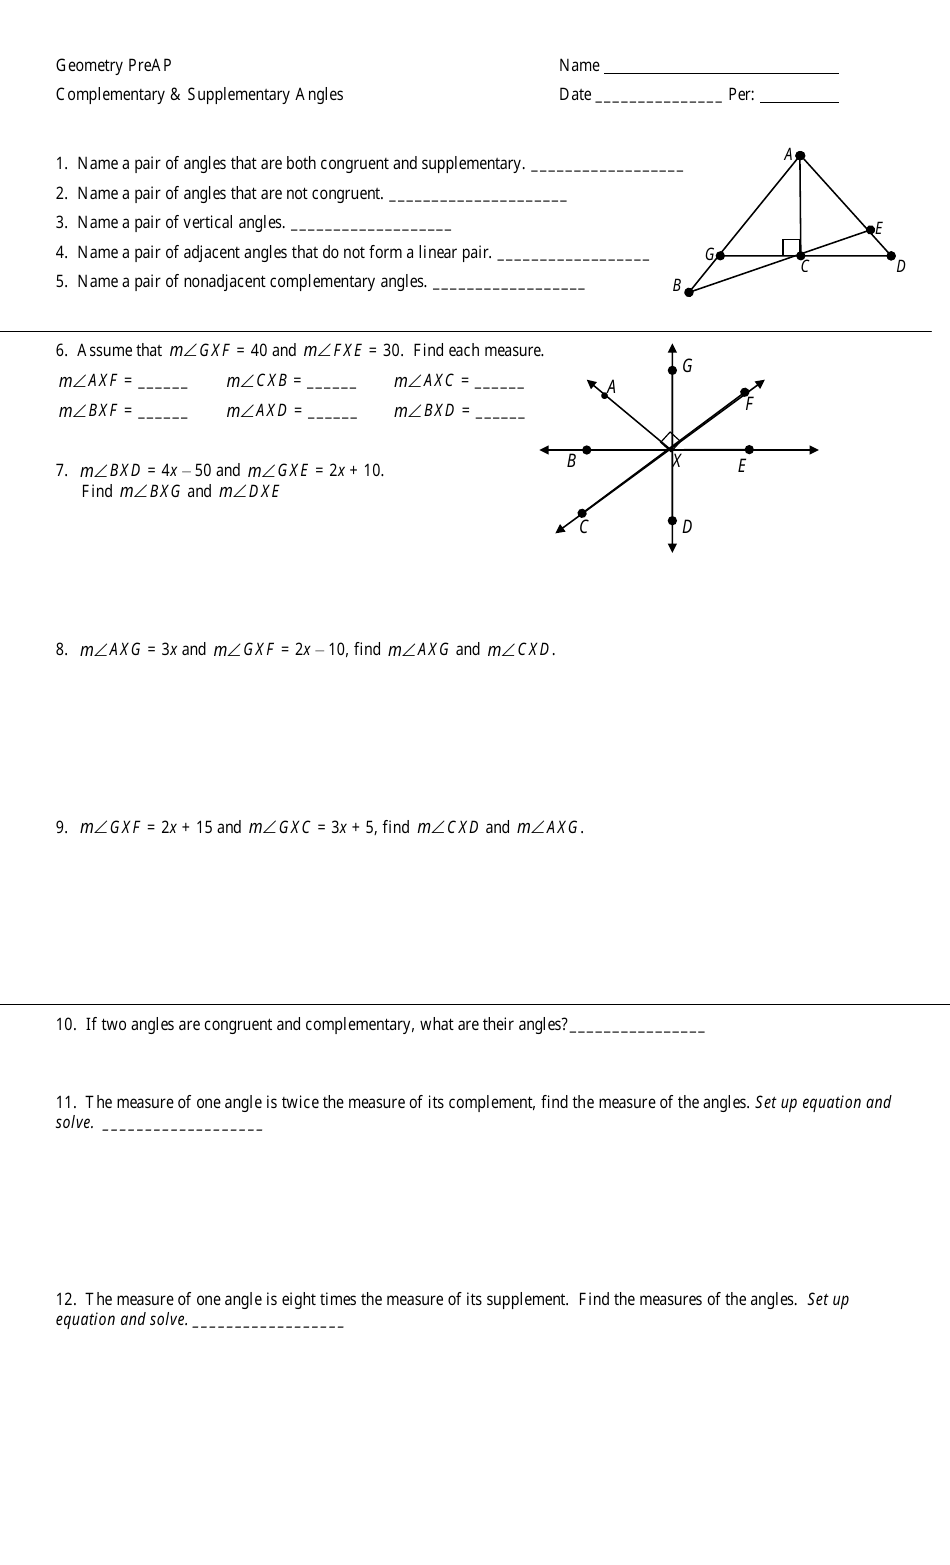 Geometry Preap Complementary and Supplementary Angles Worksheet - Preview Image